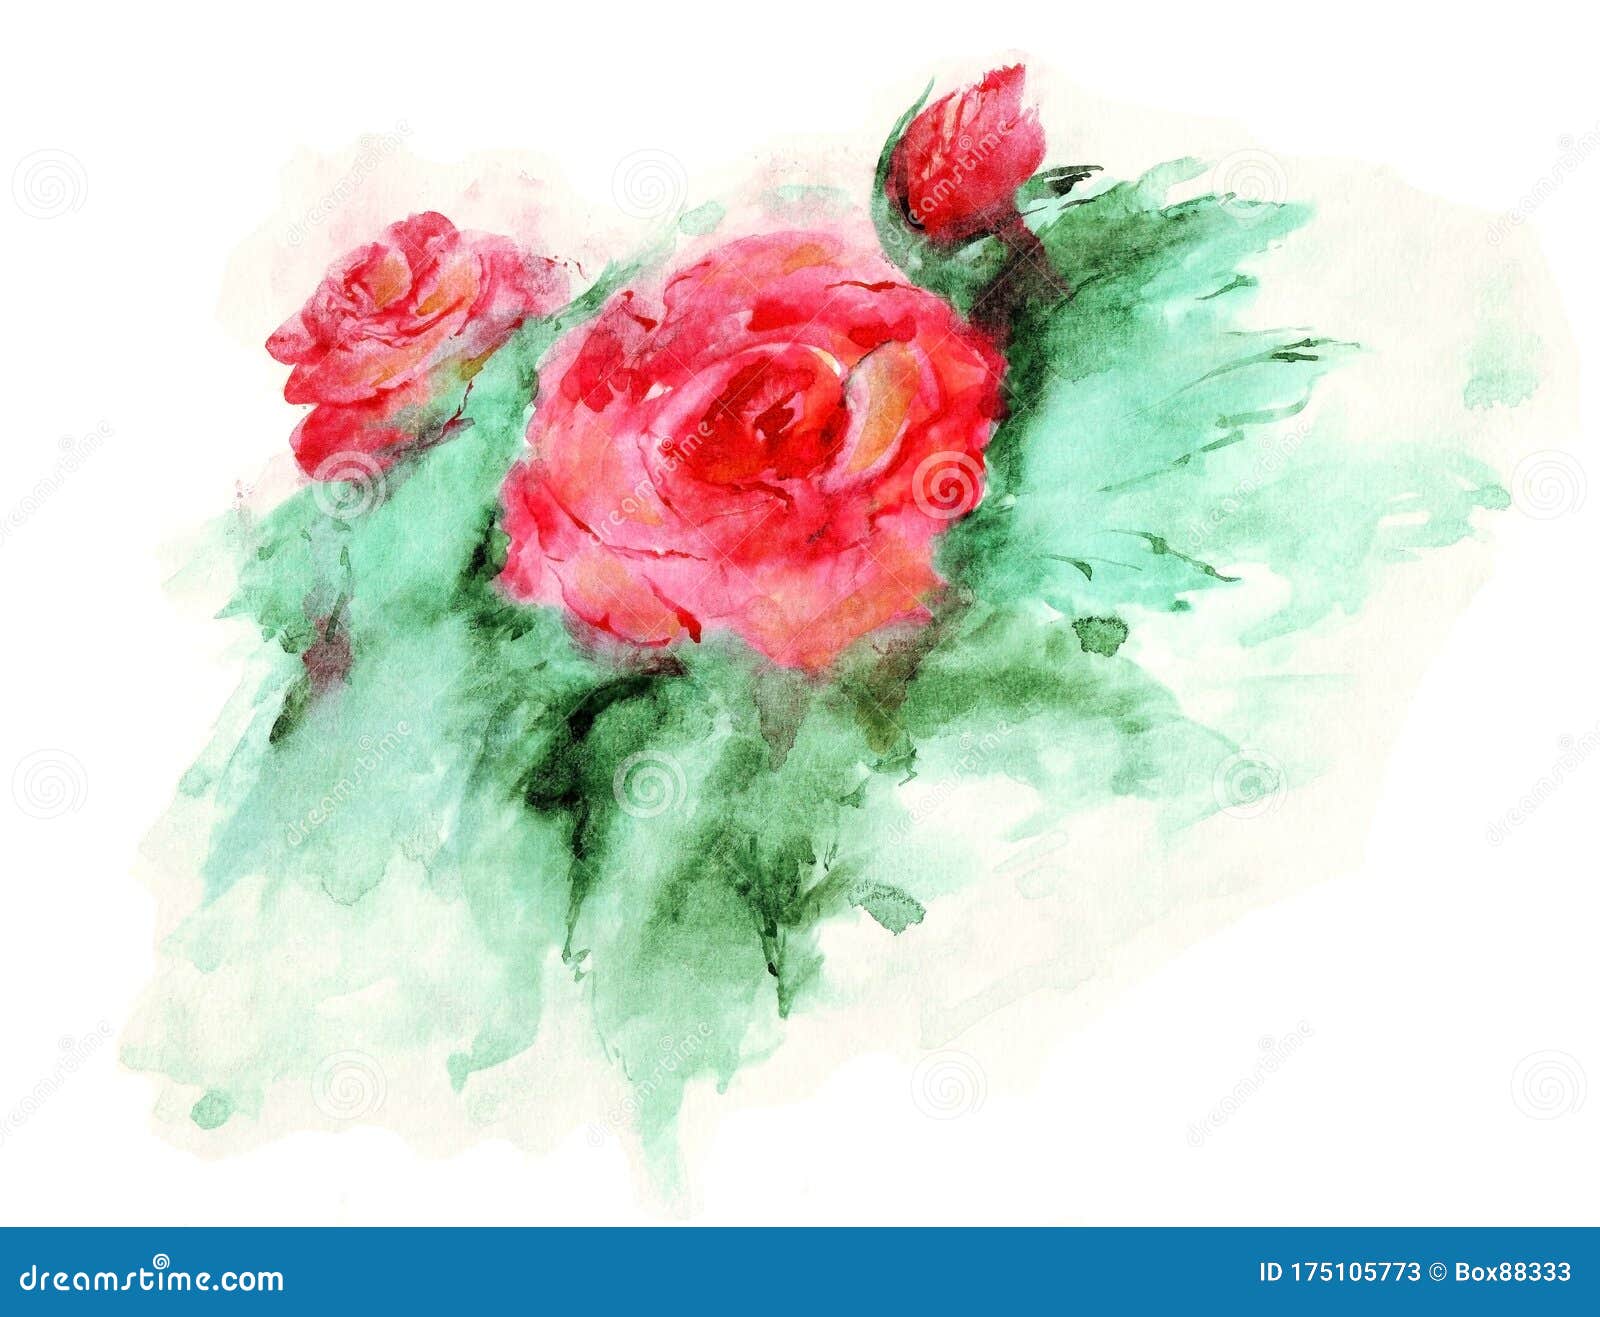 Watercolor Sketch of Red Roses. Two Flowers and a Bud, Green Leaves ...